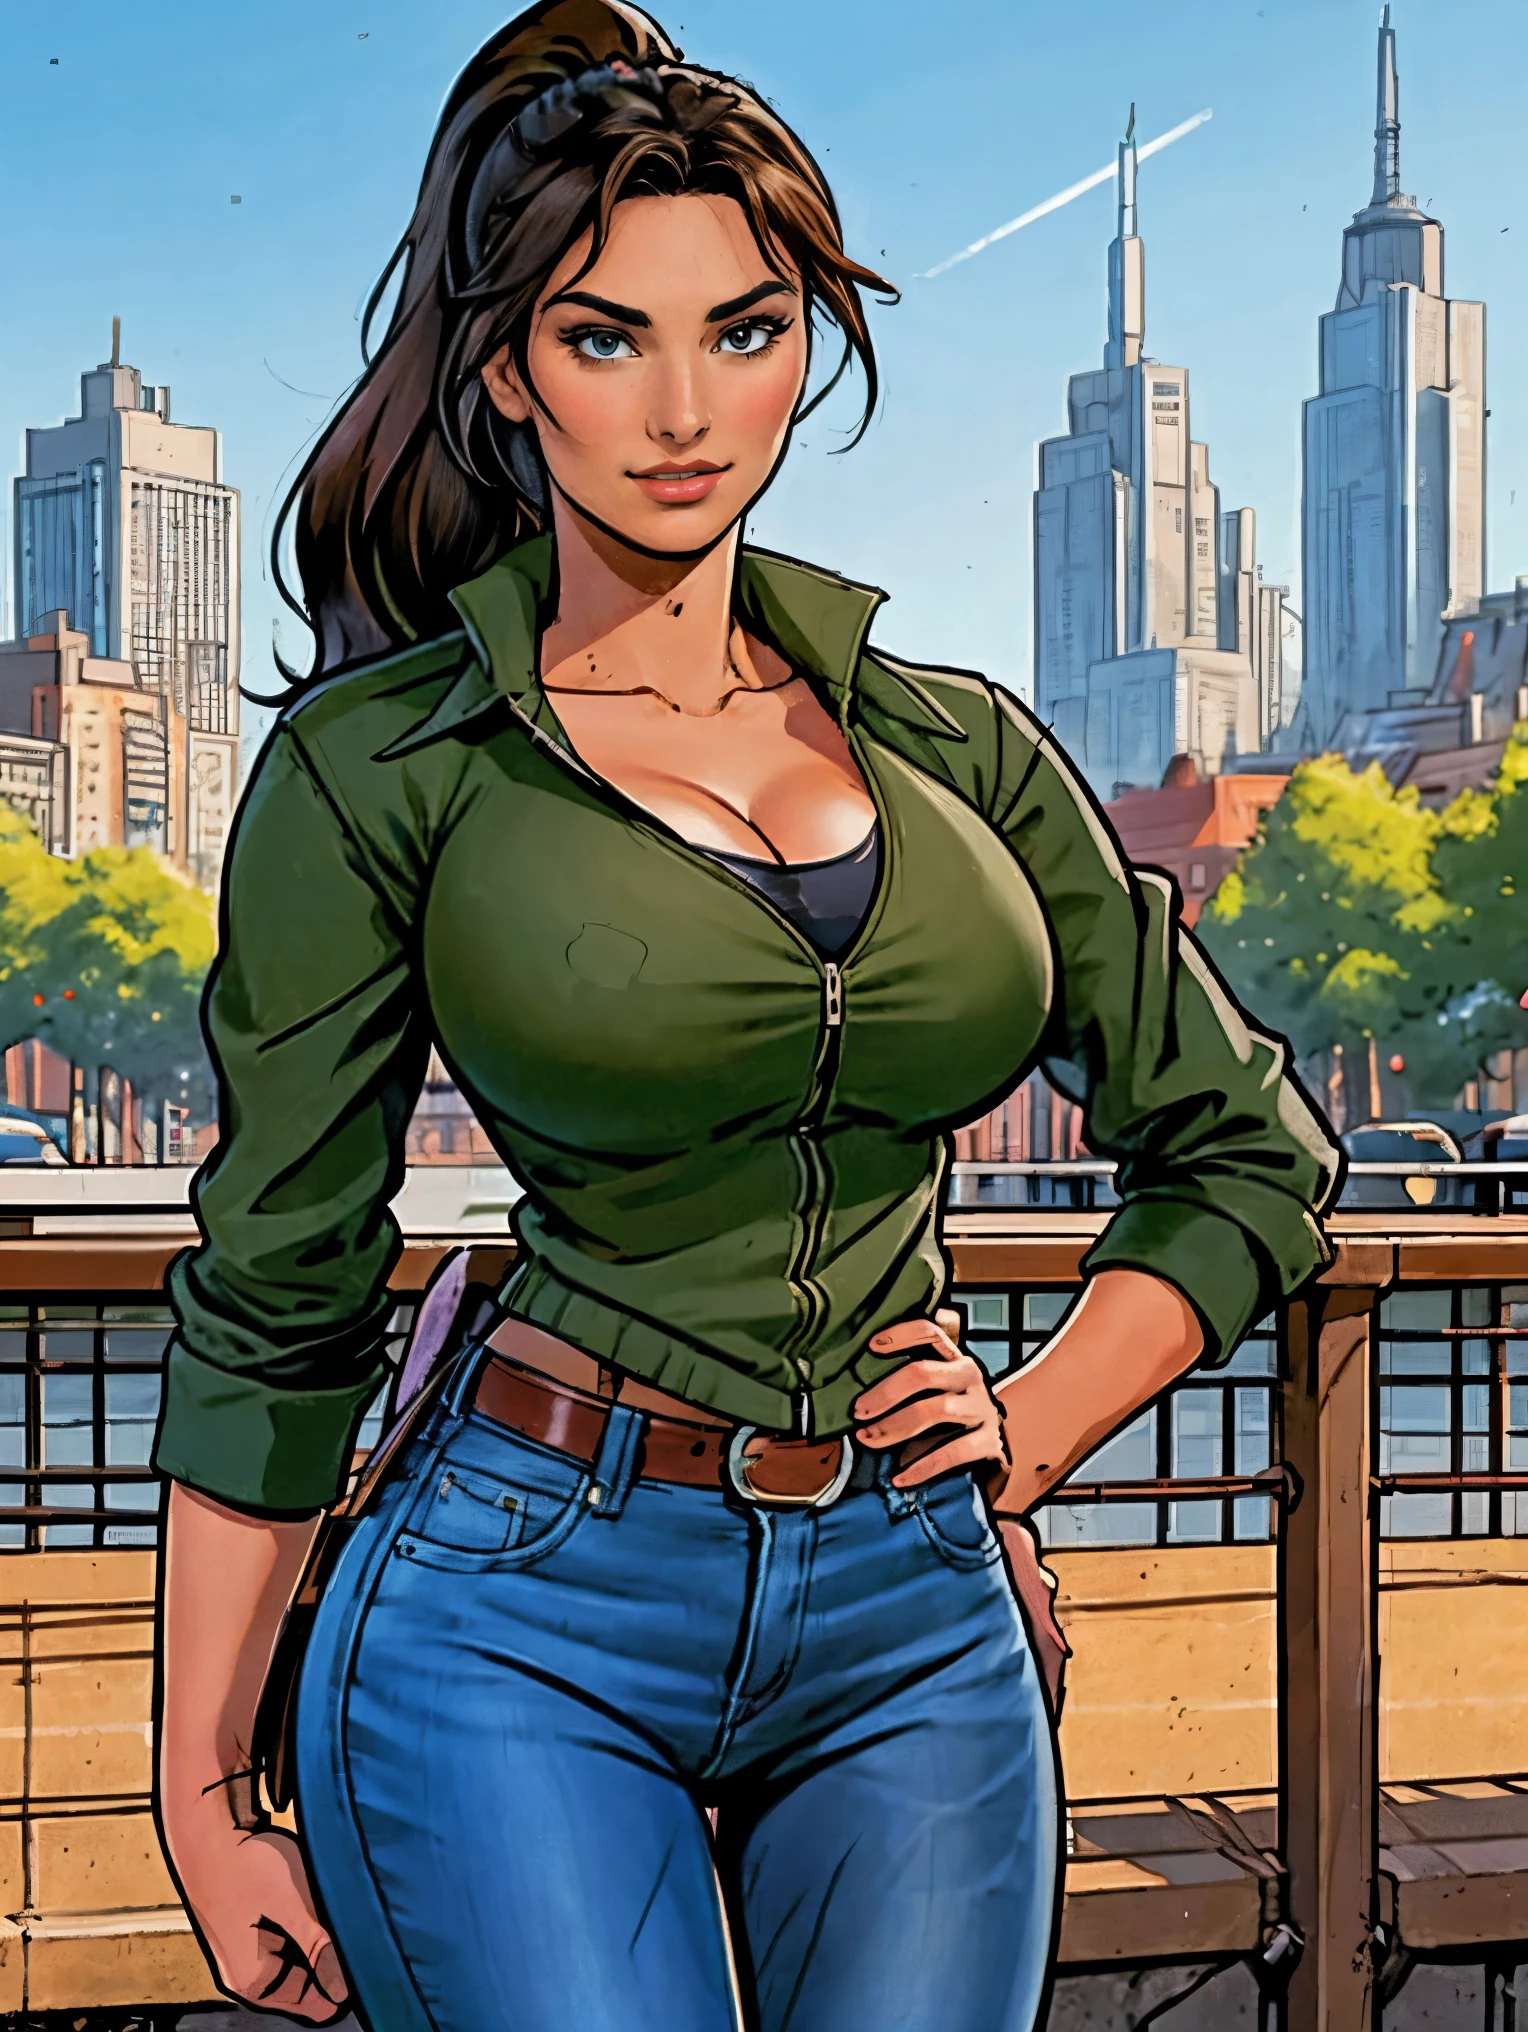 (masterpiece, top quality, best quality, official art, beautiful and aesthetic:1.2), (1girl:1.3), dark brown hair pulled back, elegant updo, extremely detailed, portrait, looking at viewer, facing viewer, solo, (full body:0.6), detailed background, close up, kindly eyes, (warm summer park theme:1.1), busty woman, charlatan, smirk, mysterious, long hair, huge ponytail, slim, thin, athletic, womanly, elastic woman, dark green jacket, tank top, blue jeans, hair bandana, camera bag, brunette, city, heroic, cheerful, city exterior, park, street, daylight, soft lighting, natural lighting, athletic, strong, slim waist, slim hips, long legs, muscular legs, modern (city park exterior:1.1) background, bright mysterious lighting, shadows, magical atmosphere, dutch angle, 